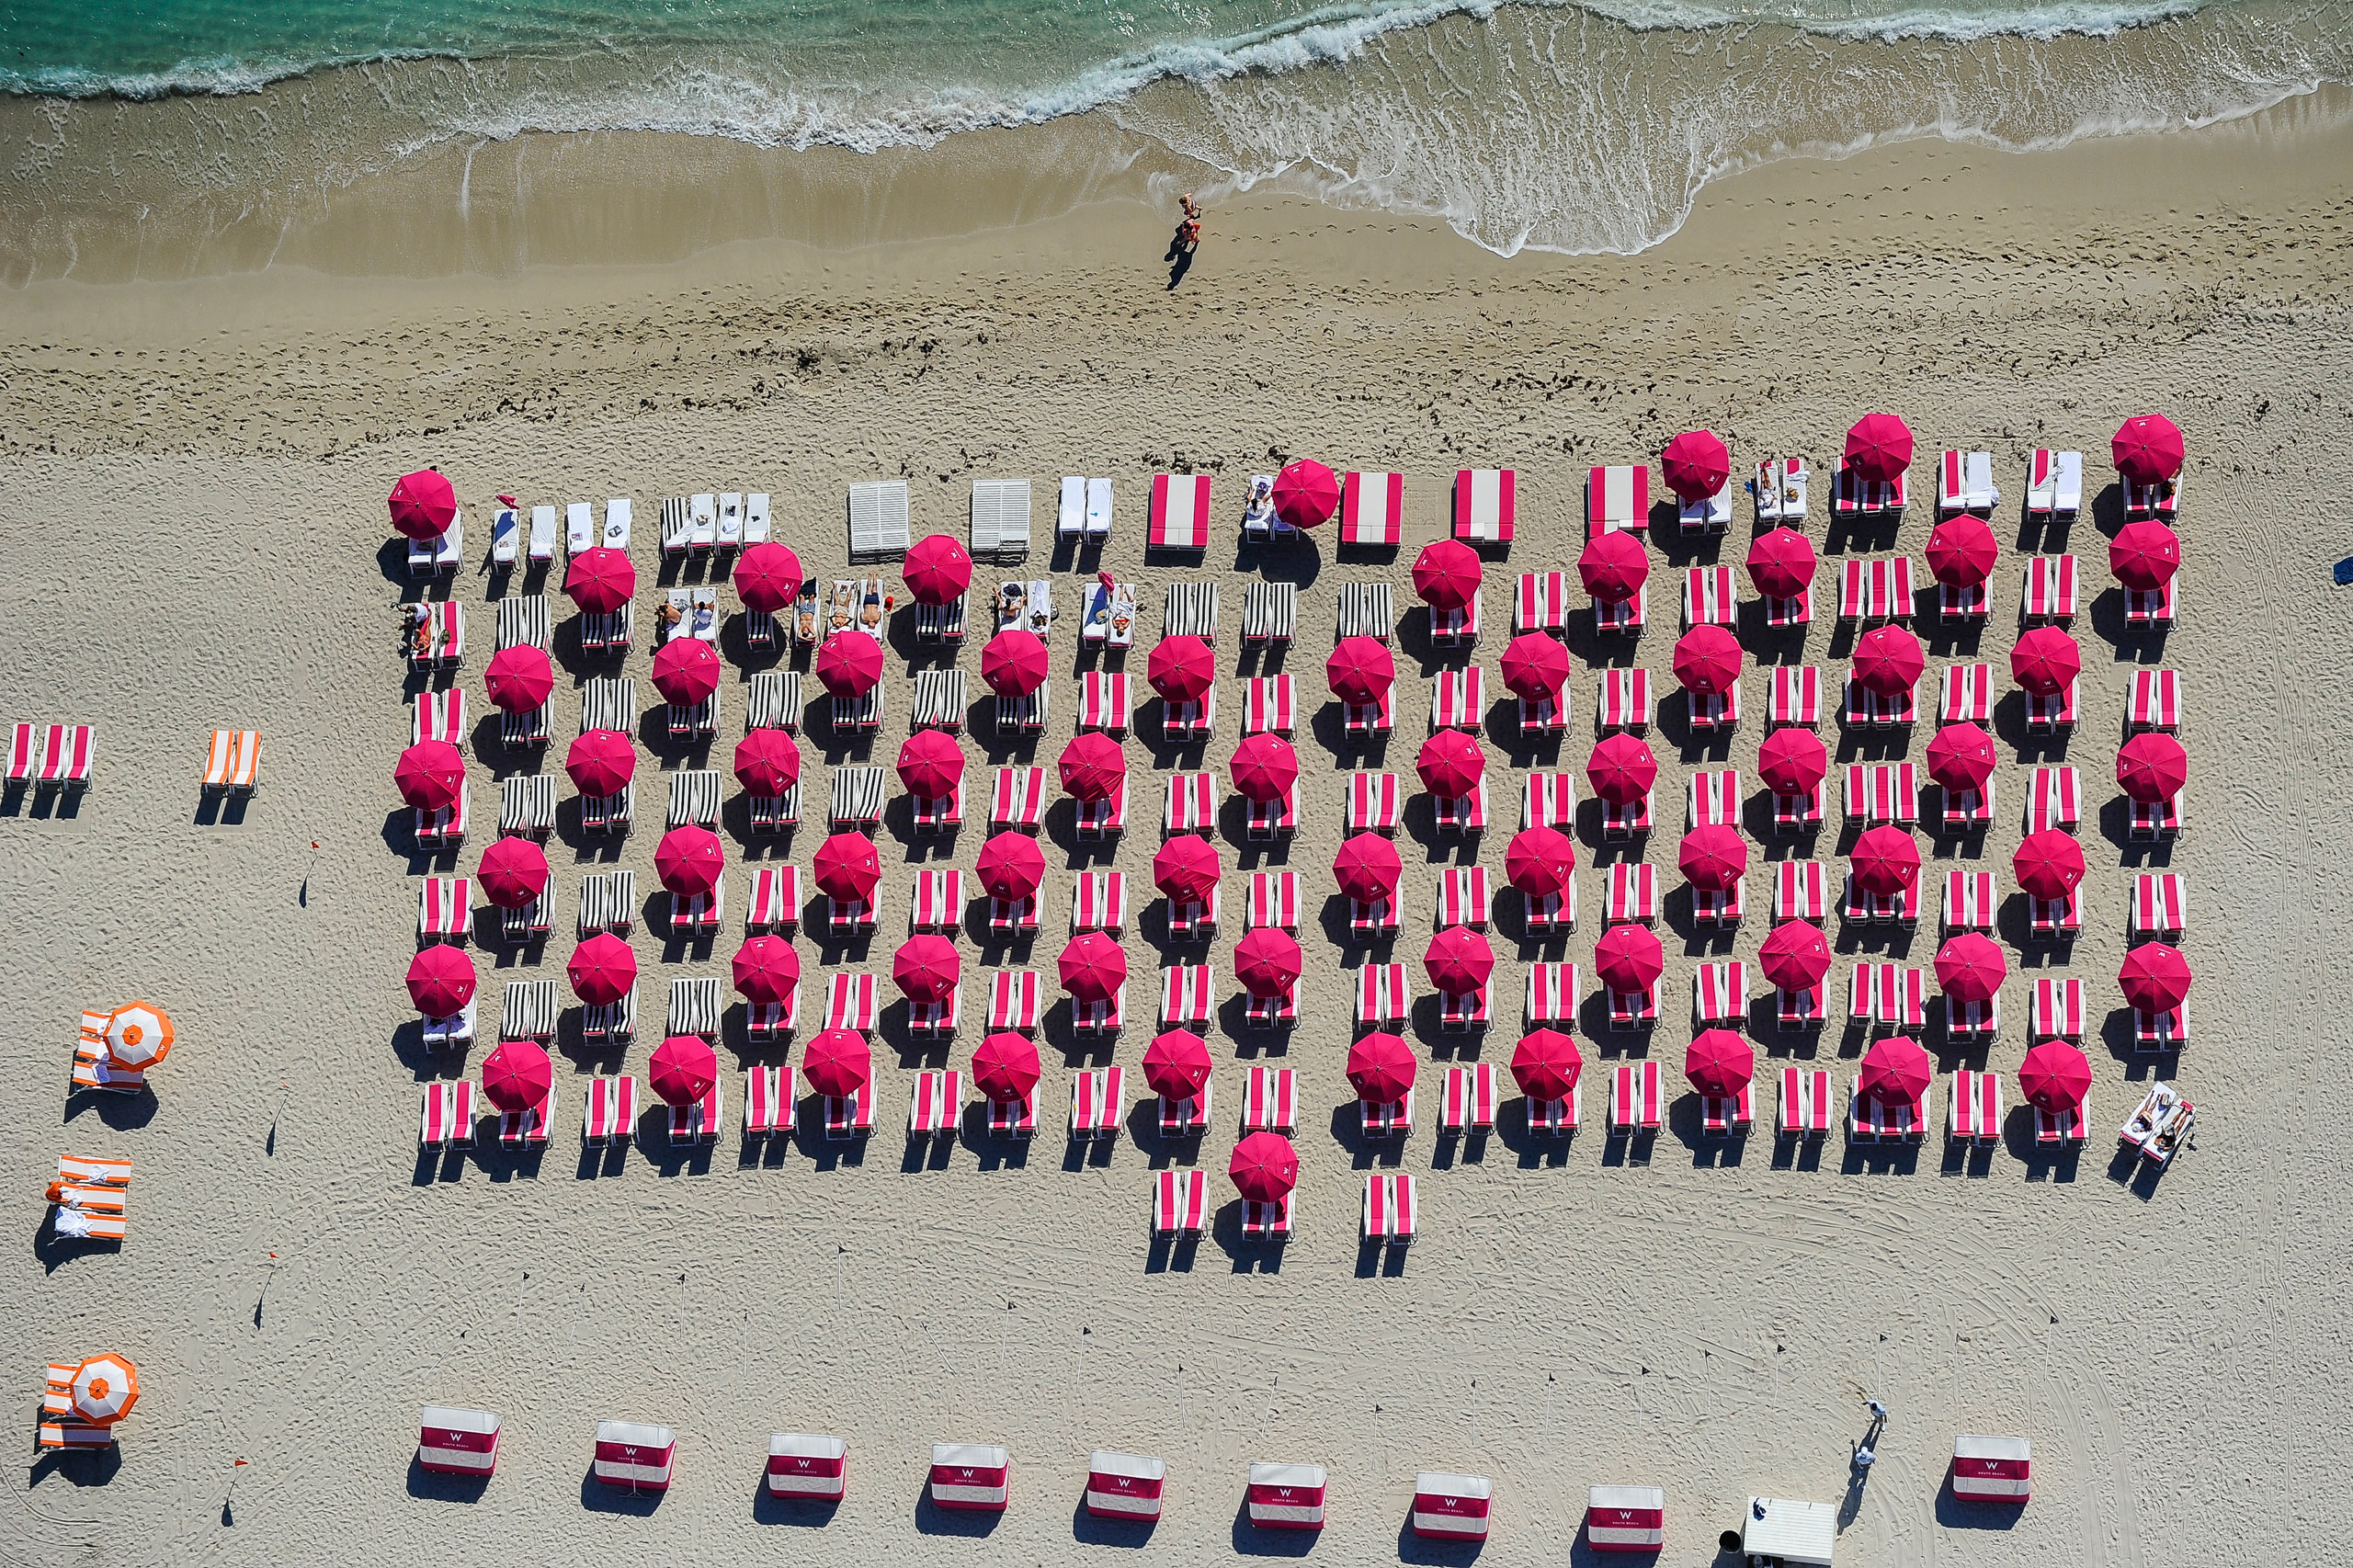 Sunbathers lounge on pink beach chairs outside the W South Beach hotel on March 8, 2014 in Doral, Florida.